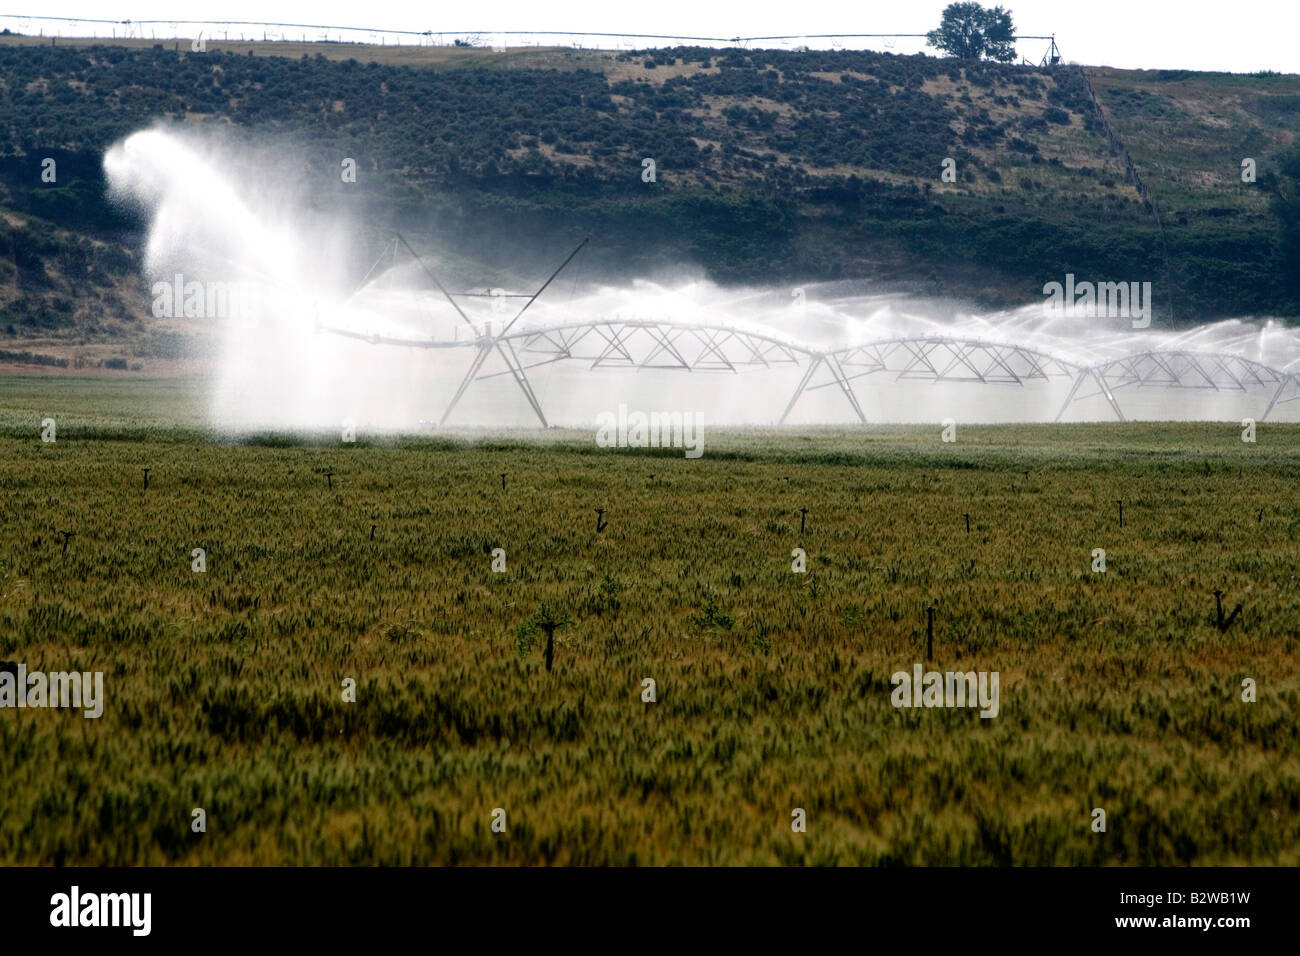 Sprinkler irrigation of a wheat field in Elmore County Idaho Stock Photo